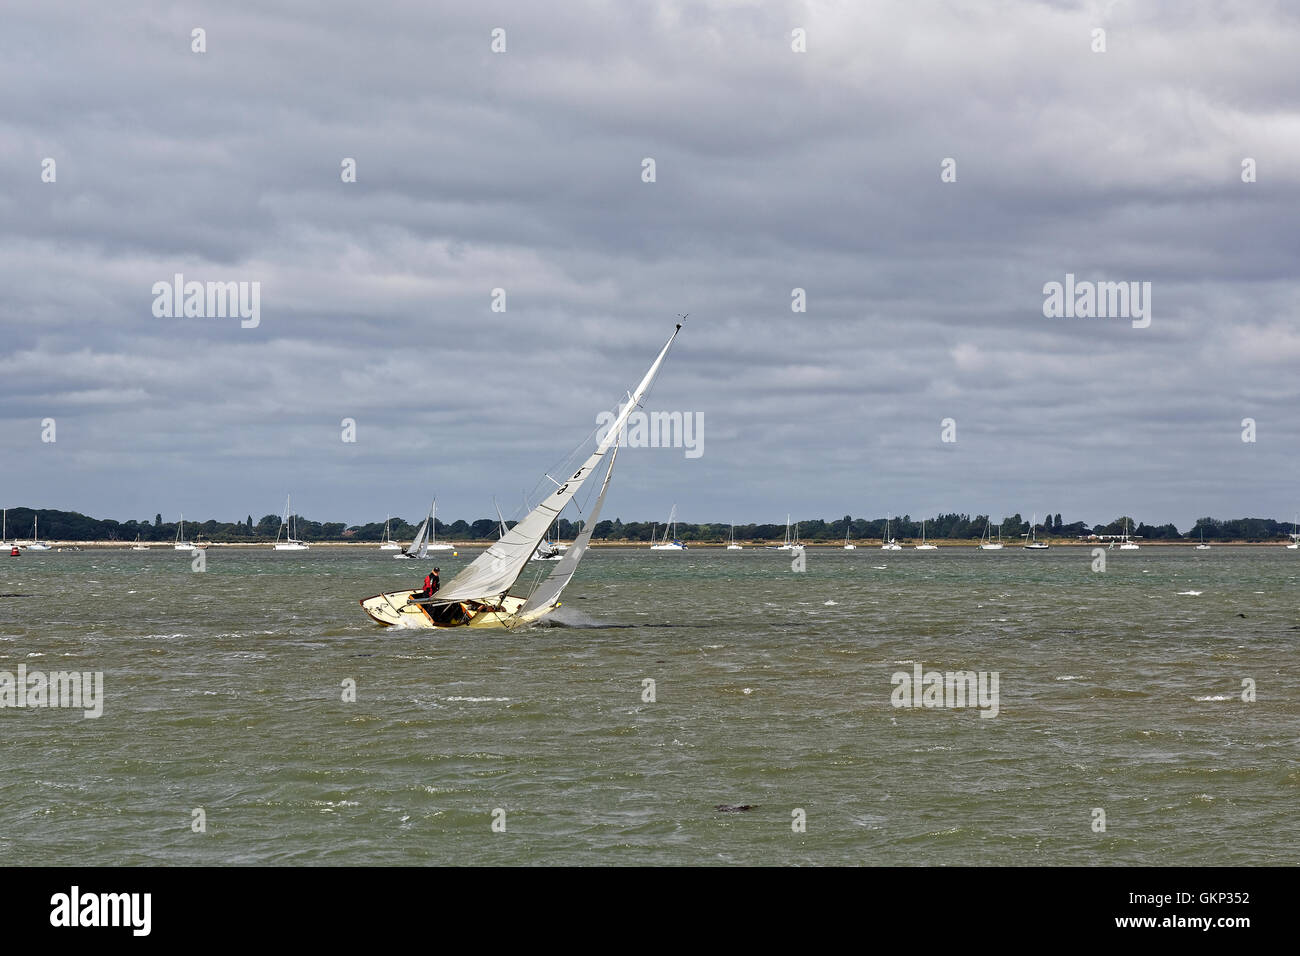 A sailing boat heels over, decks awash and running fast driven by strong winds. Stock Photo